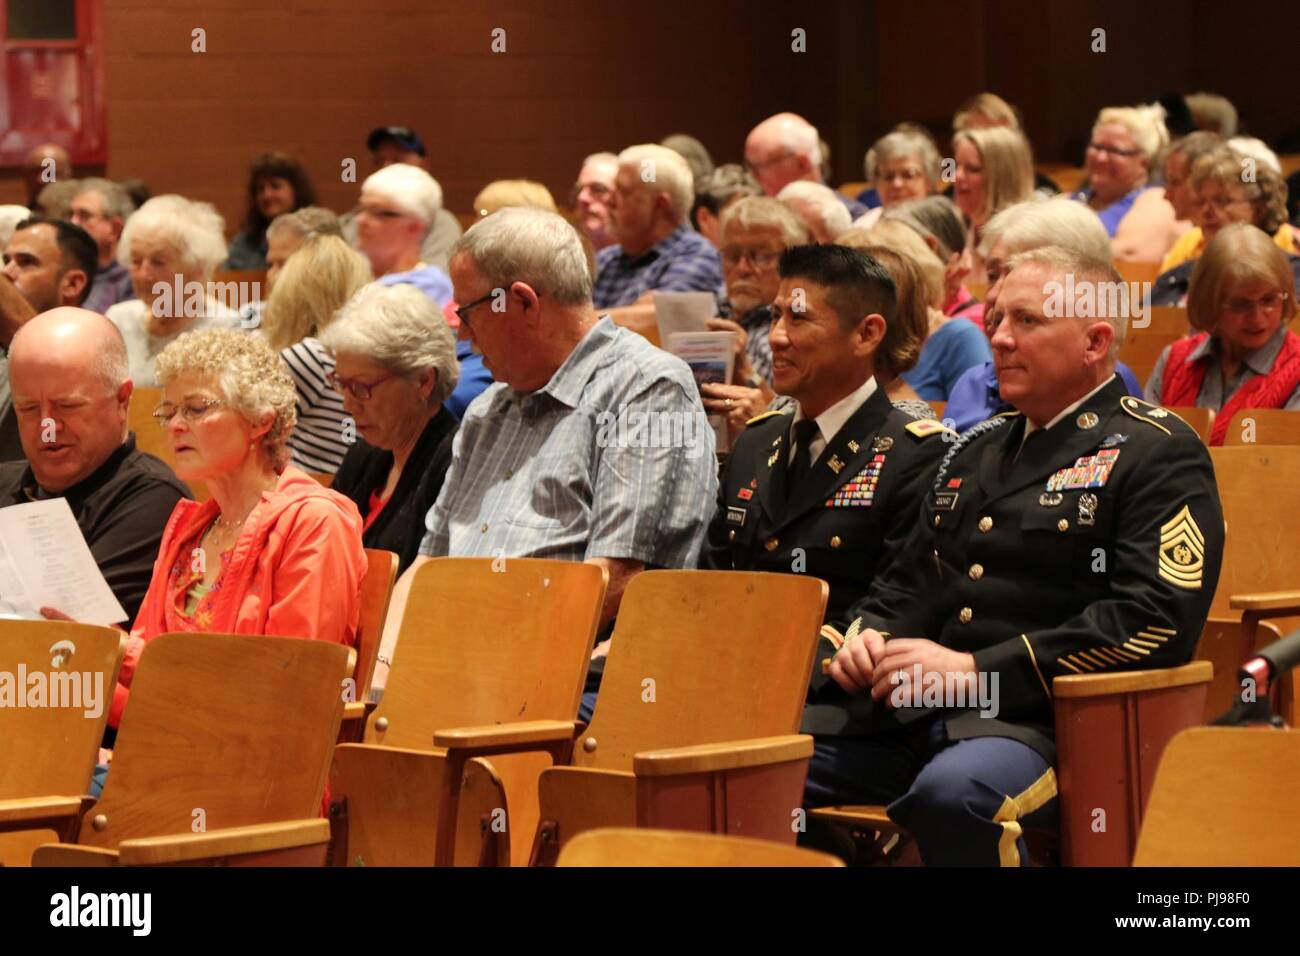 Col. Neal S. Mitsuyoshi, Commander of 103rd Troop Command, and Command Sgt. Maj. Thomas Odoardi of 103rd Troop Command arrive as guests to the joint concert of the 111th Army Band and 234th Army Band at Astoria High School in Astoria, Oregon, July 7, 2018. The concert is the second collaboration between the 111th Army Band and the 234th Army Band with efforts to display the results of their training in a live setting. Stock Photo